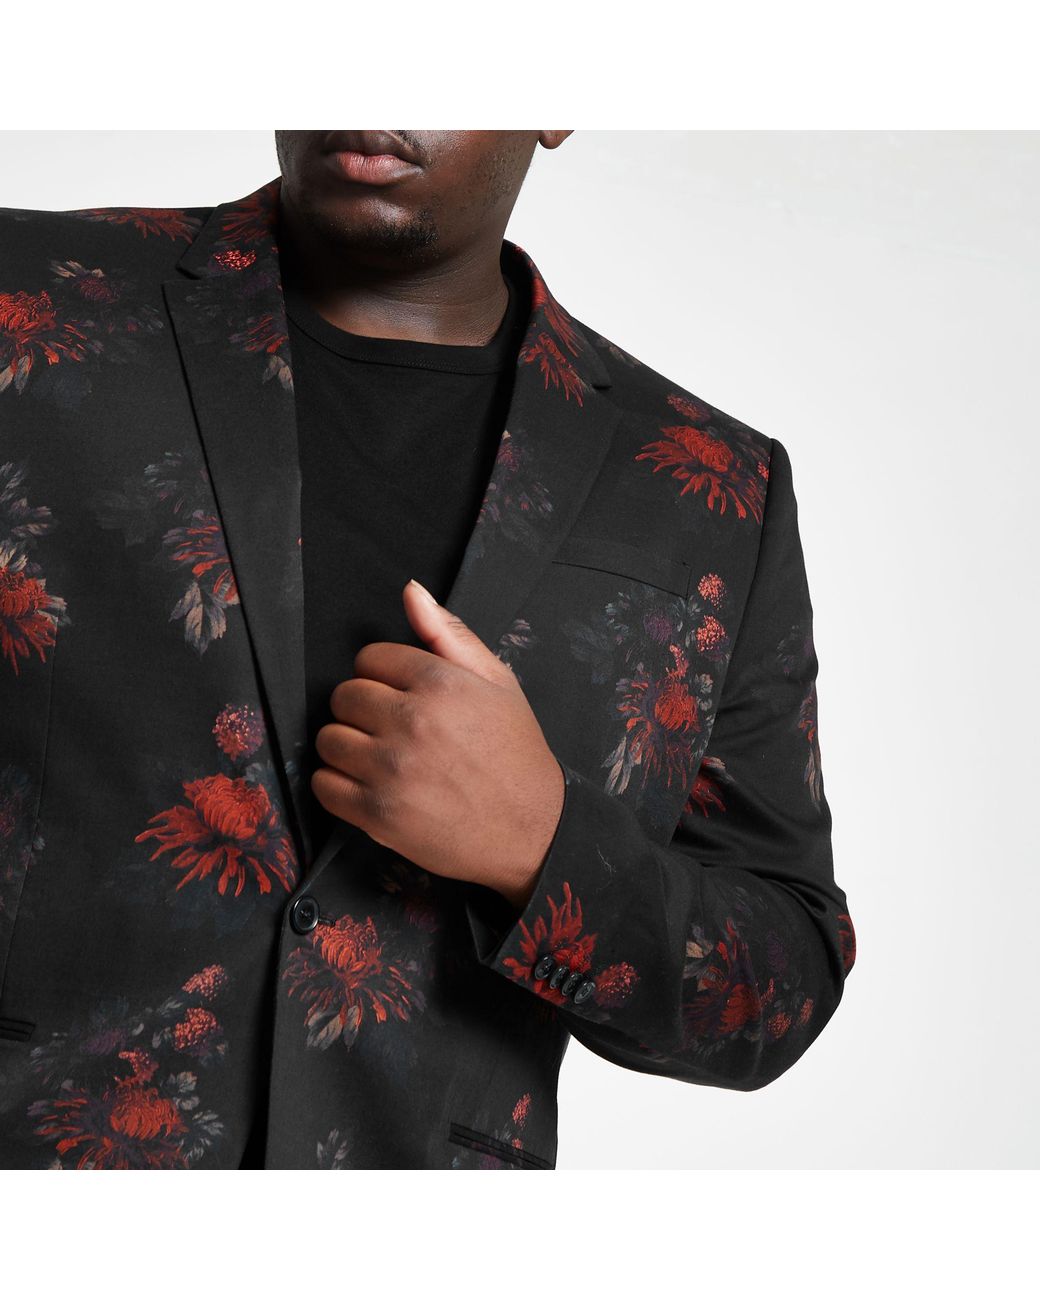 River Island Big And Tall Black Floral Suit Jacket for Men | Lyst